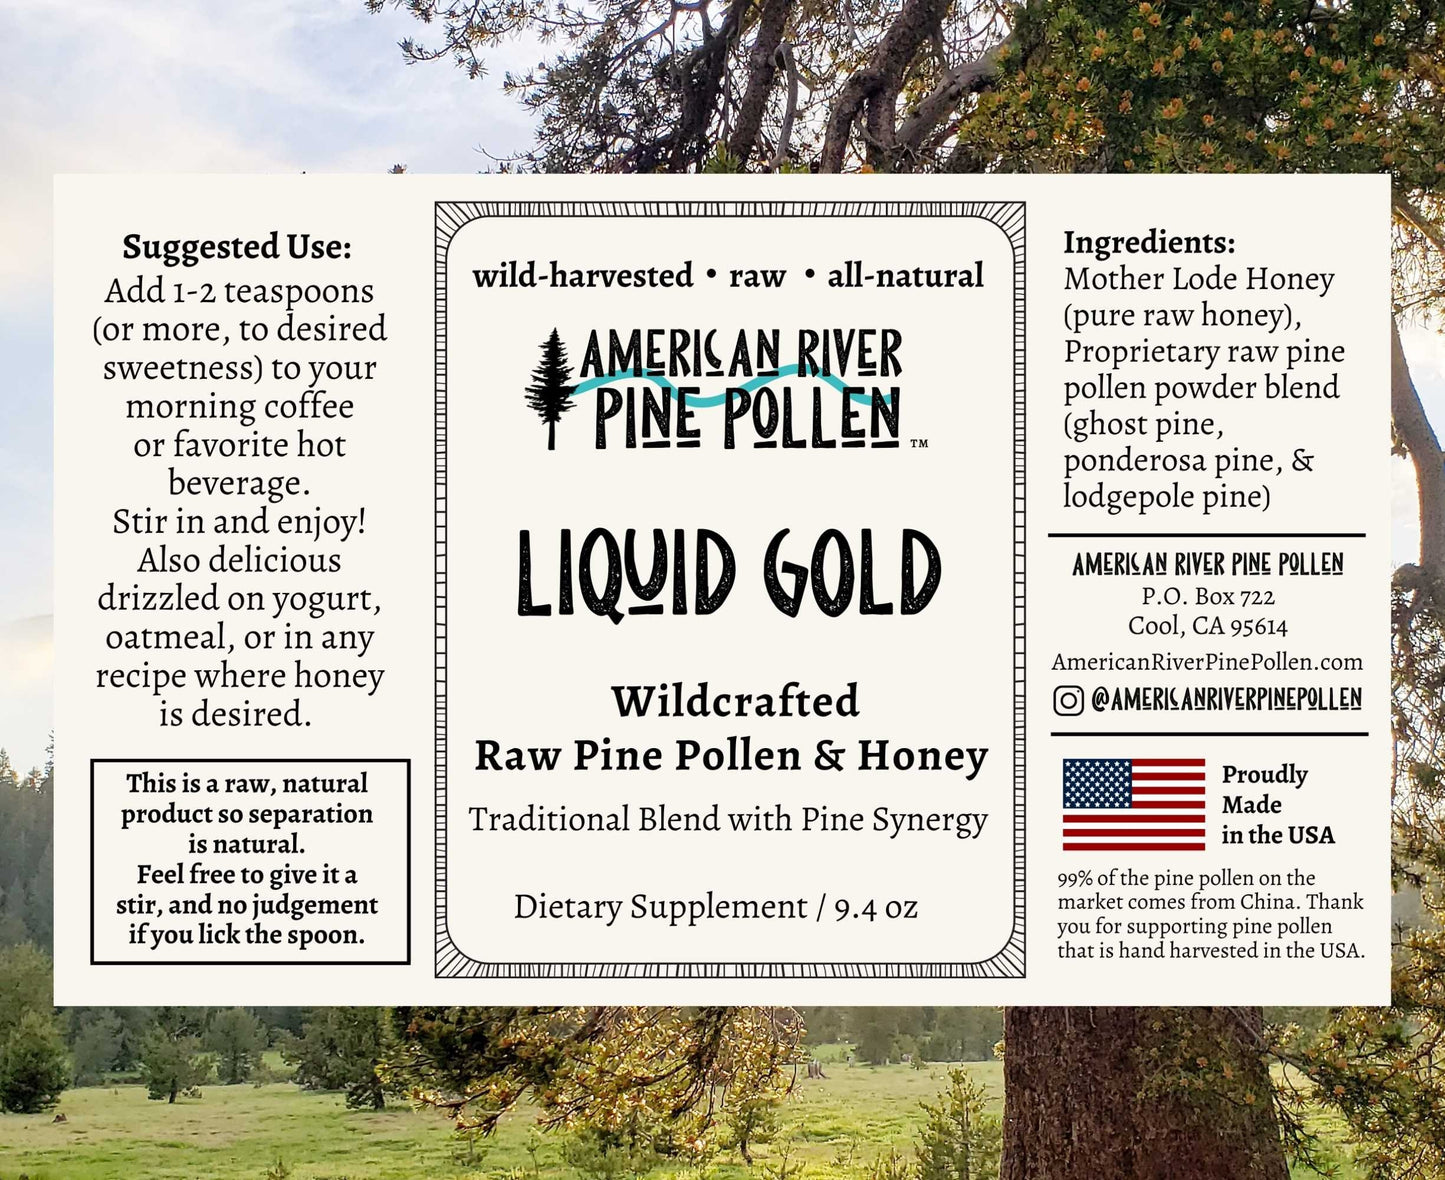 Liquid Gold -  Wildcrafted Raw Pine Pollen and Honey - Traditional Blend with Pine Synergy